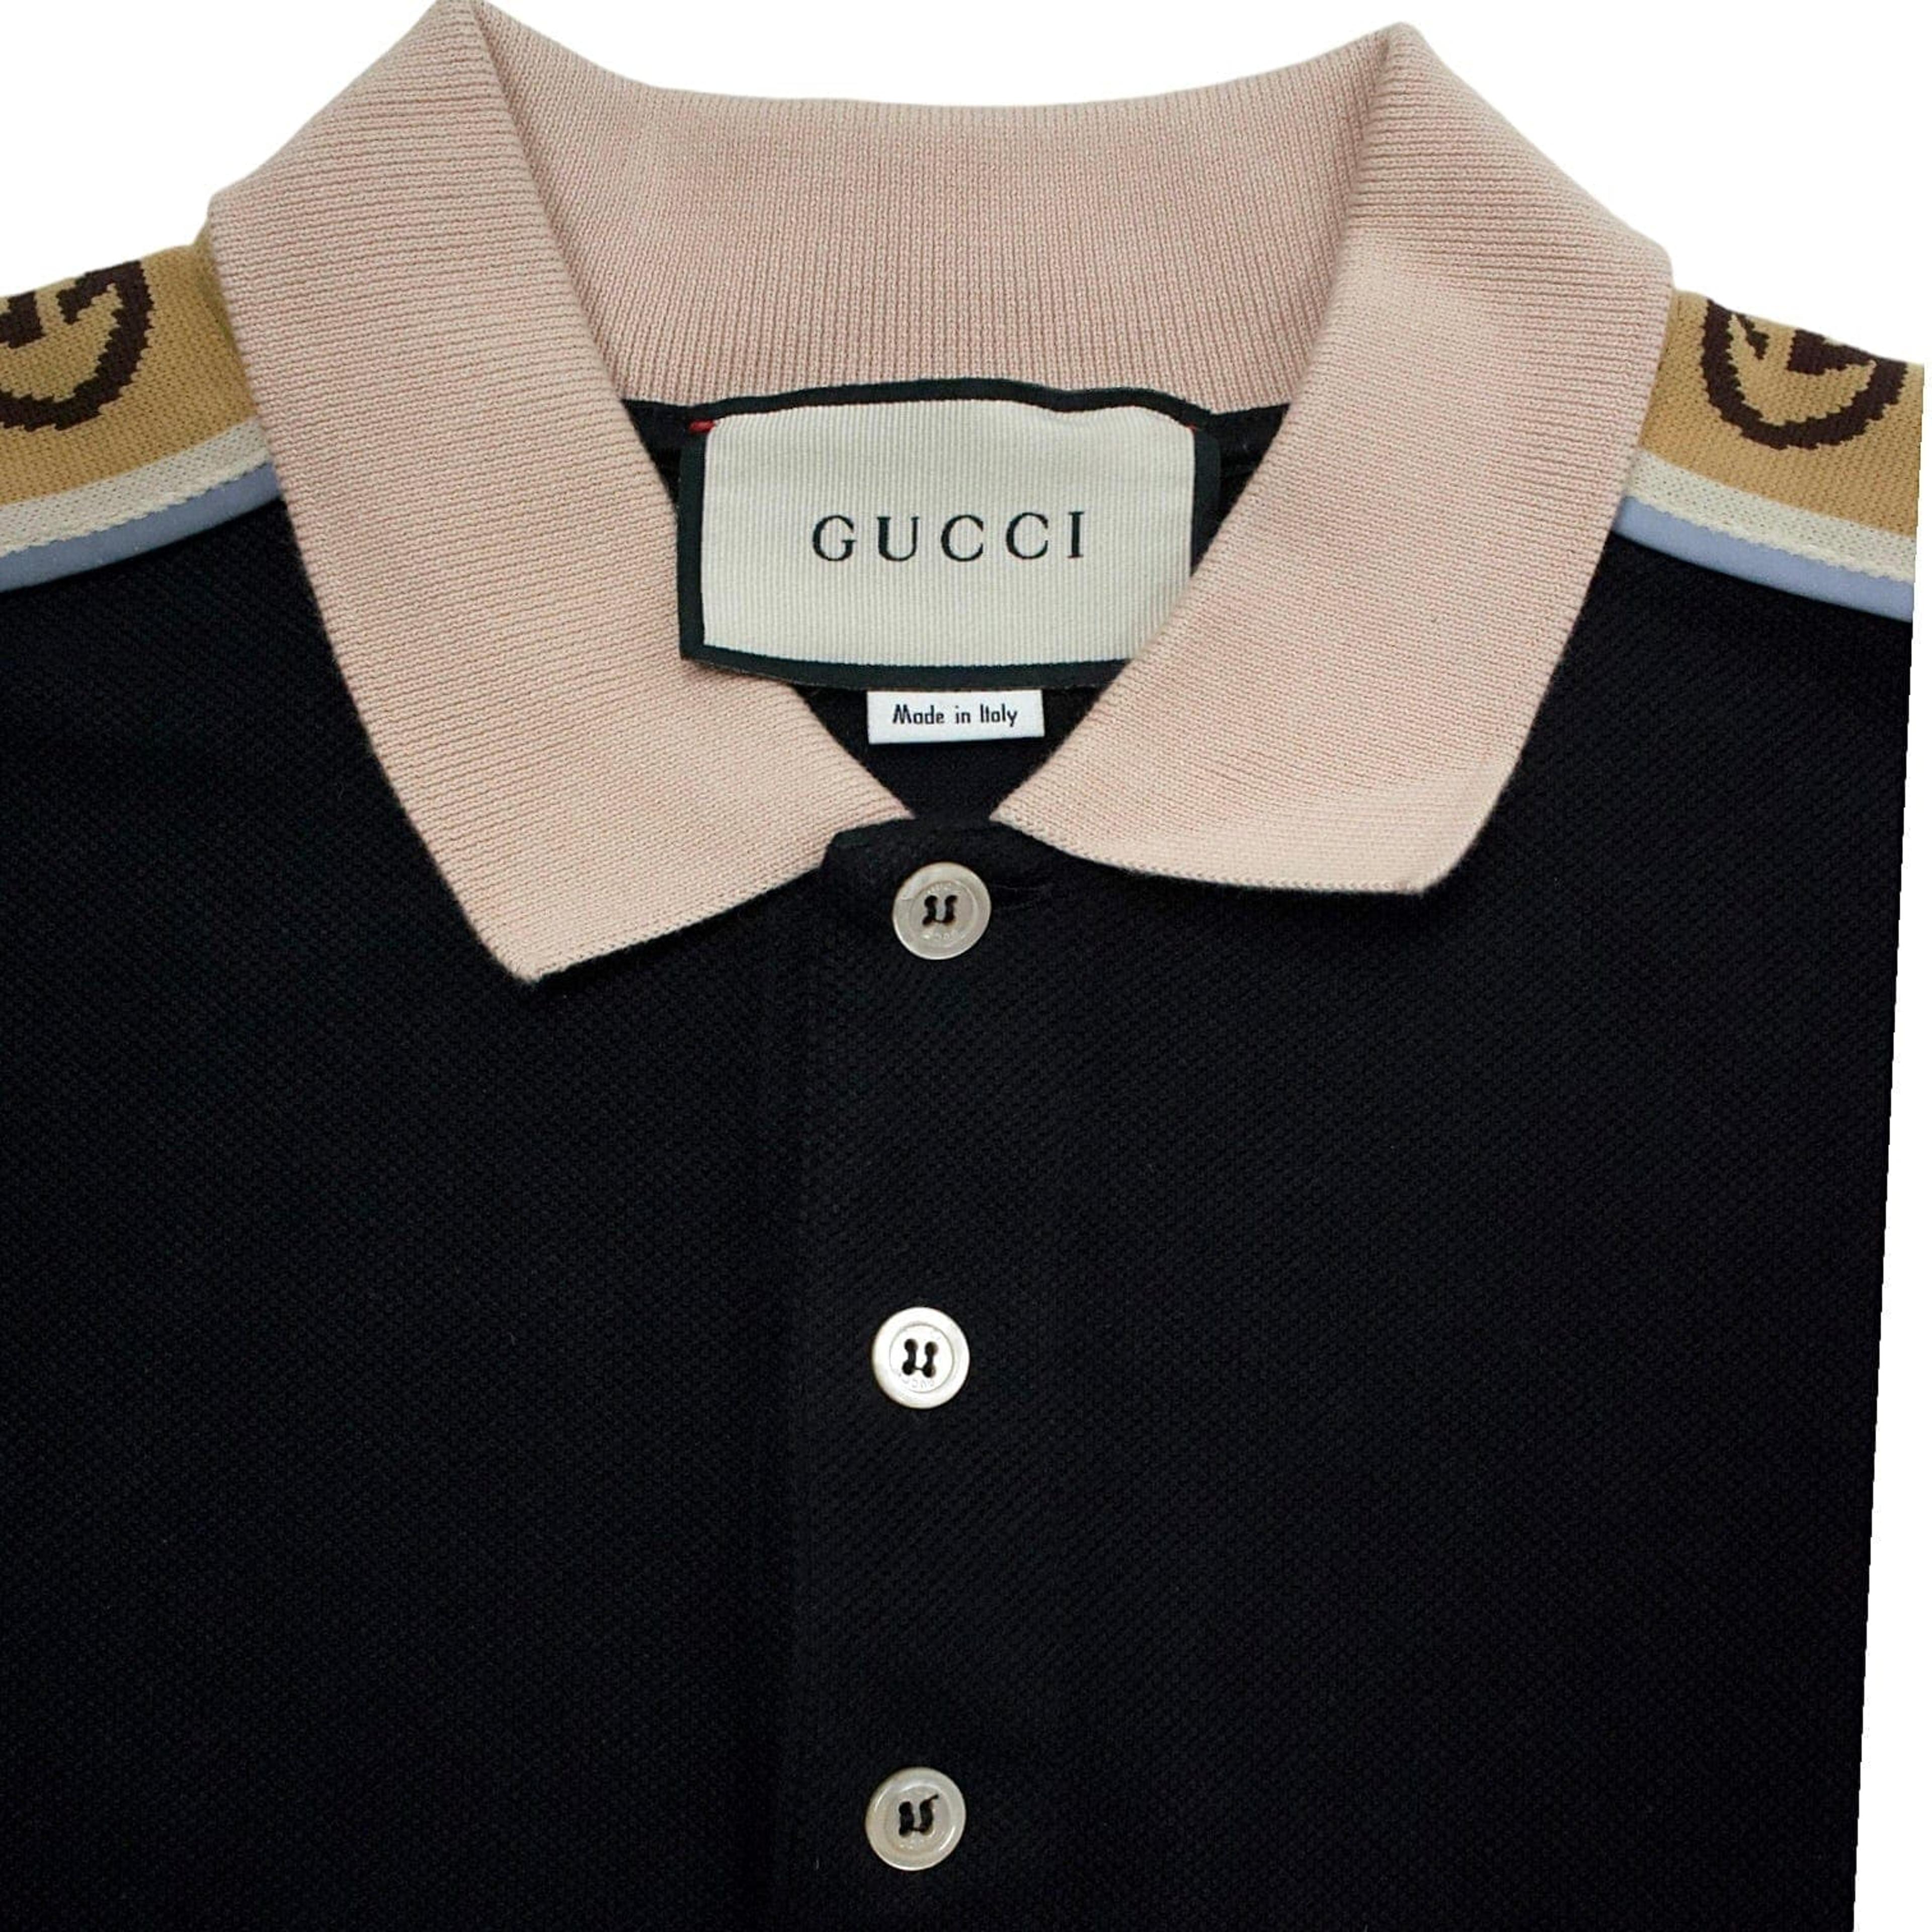 Alternate View 2 of Gucci Taped Logo Long Sleeve Polo Tee Shirt Black Pre-Owned